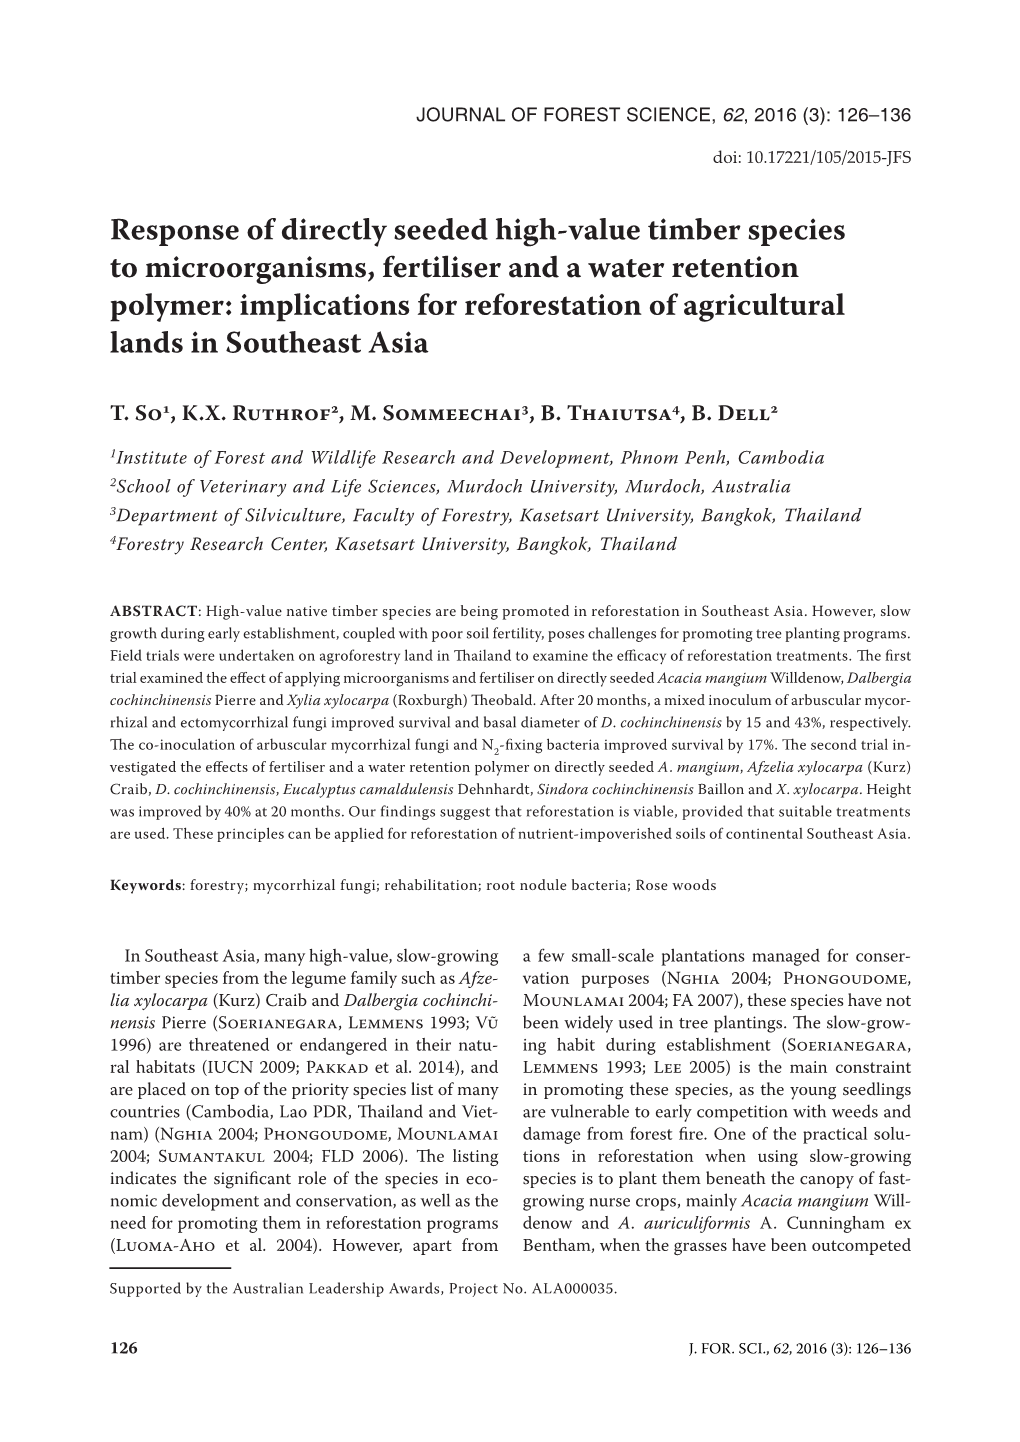 Response of Directly Seeded High-Value Timber Species To